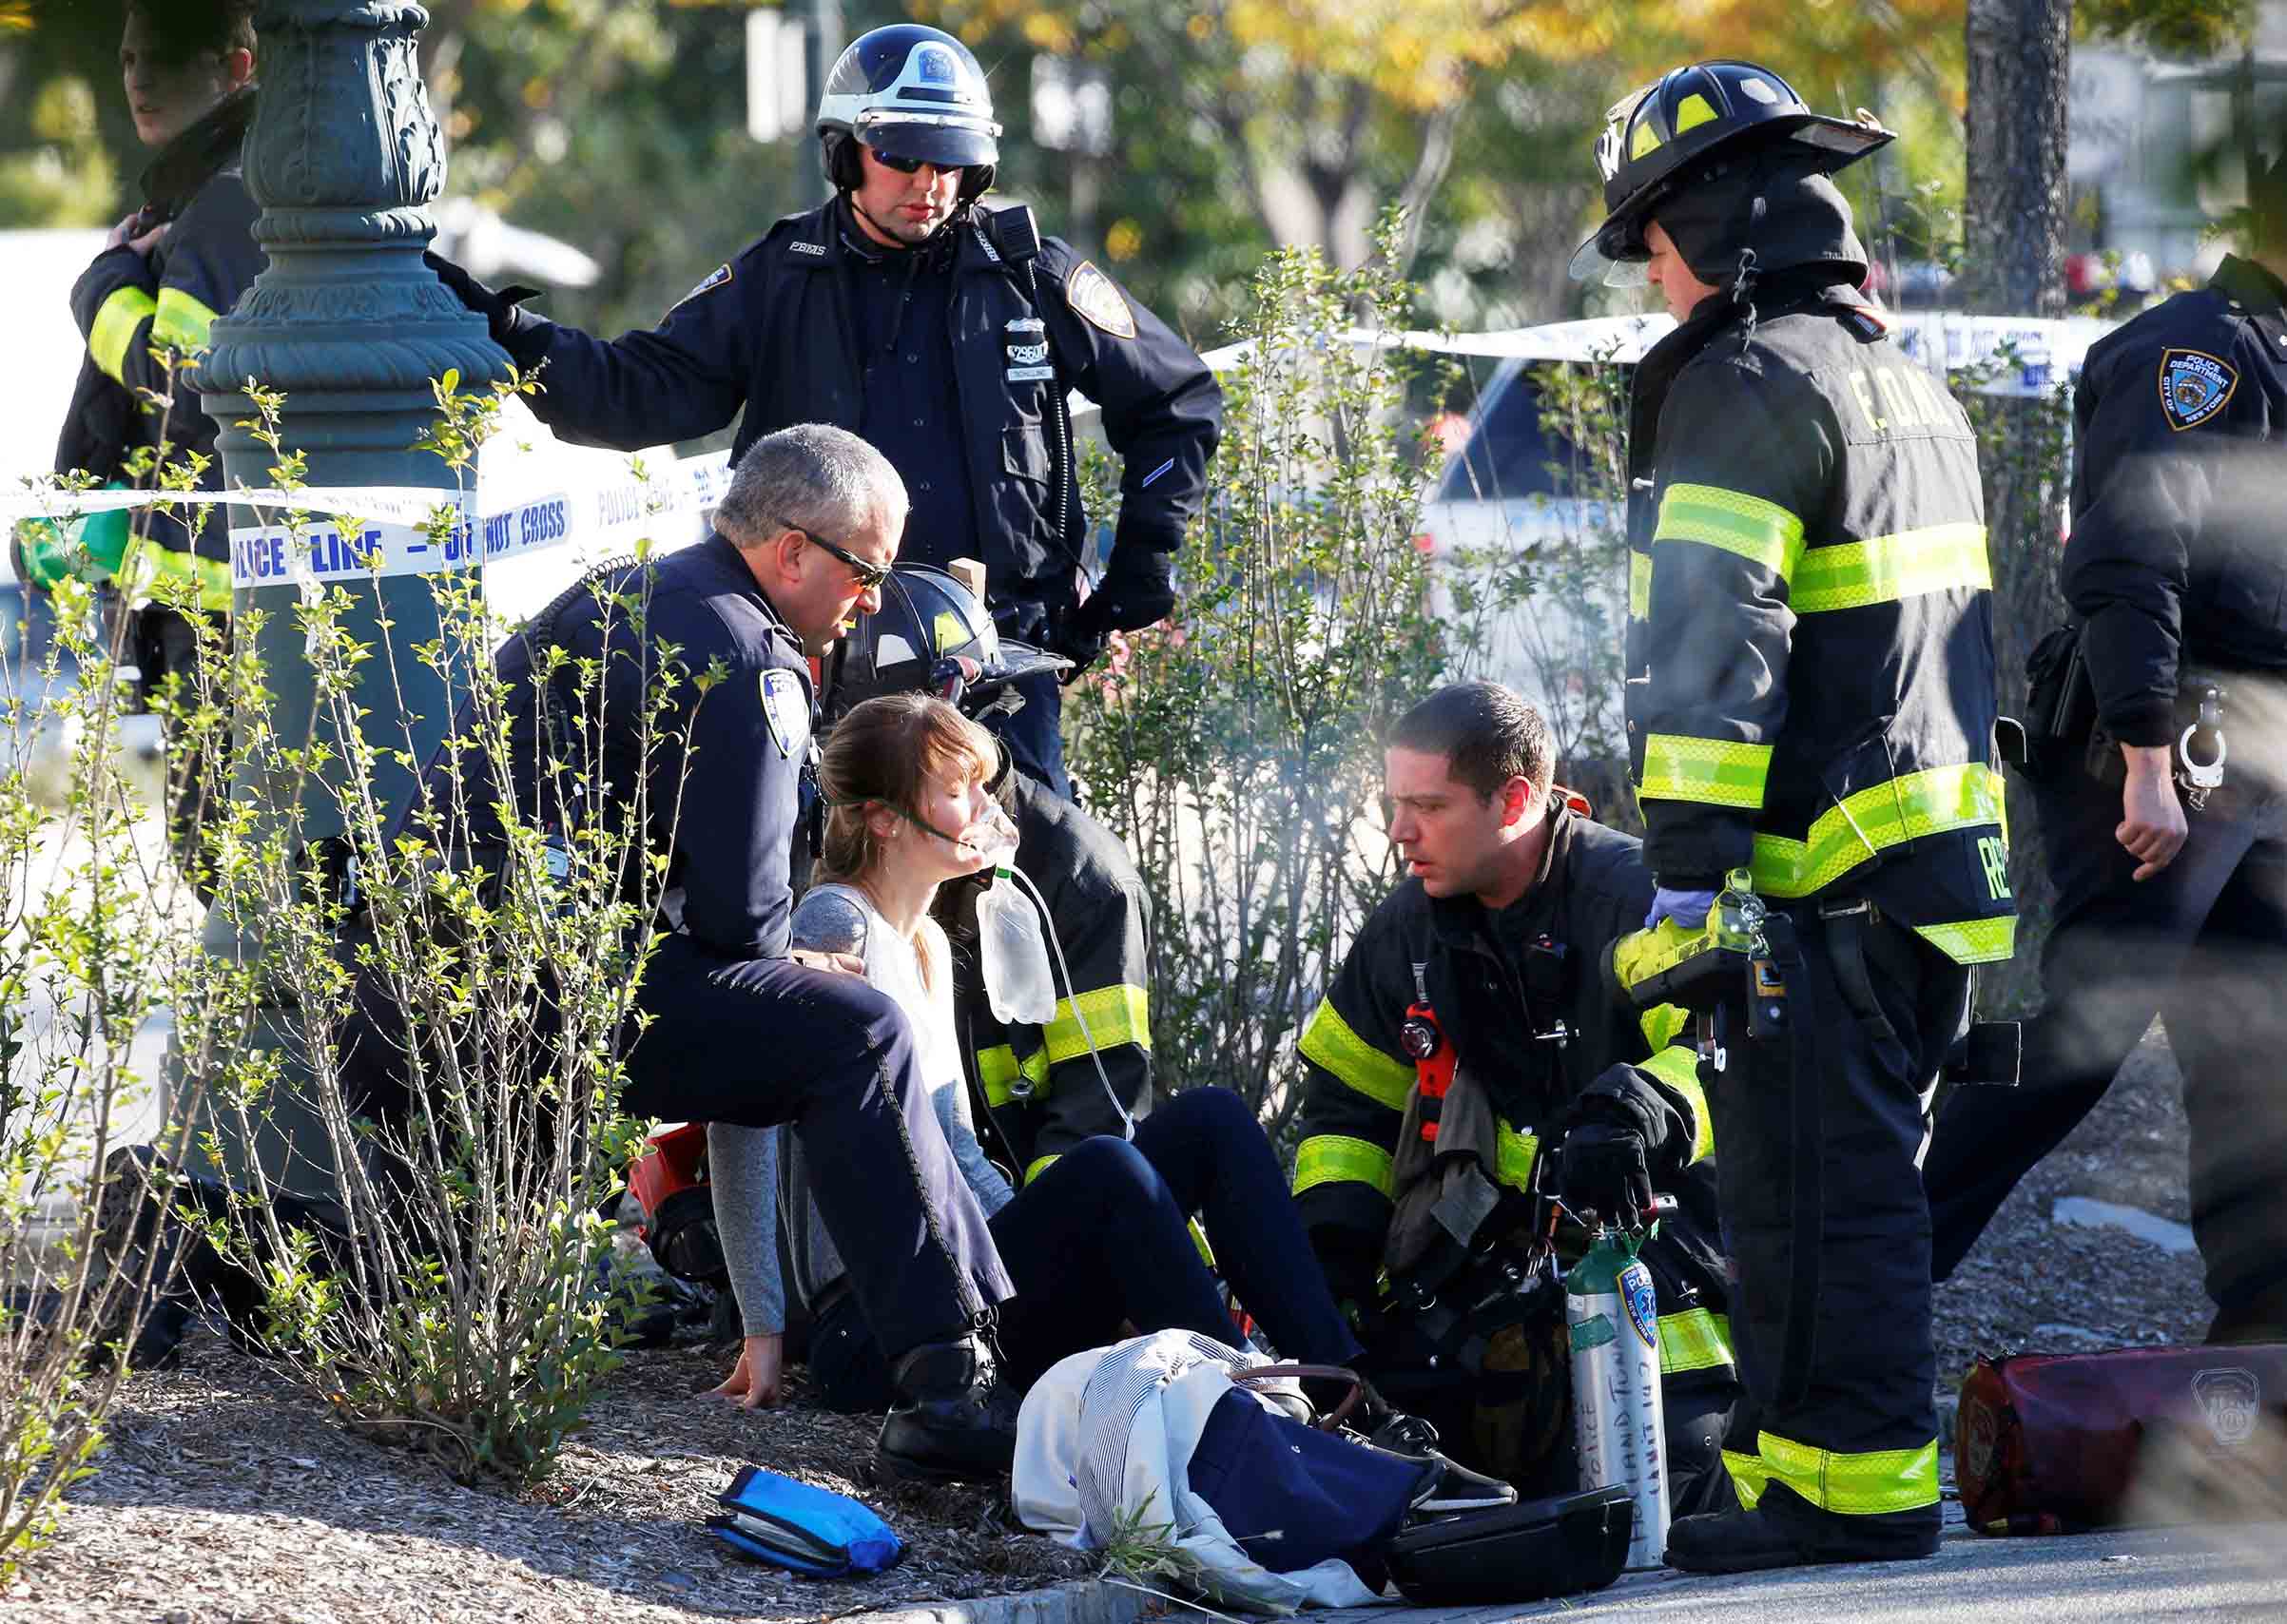 An injured woman is given oxygen by first responders after the terrorist attack that killed eight people along the West Side Highway in Lower Manhattan on Oct. 31 (Brendan McDermid—REUTERS)